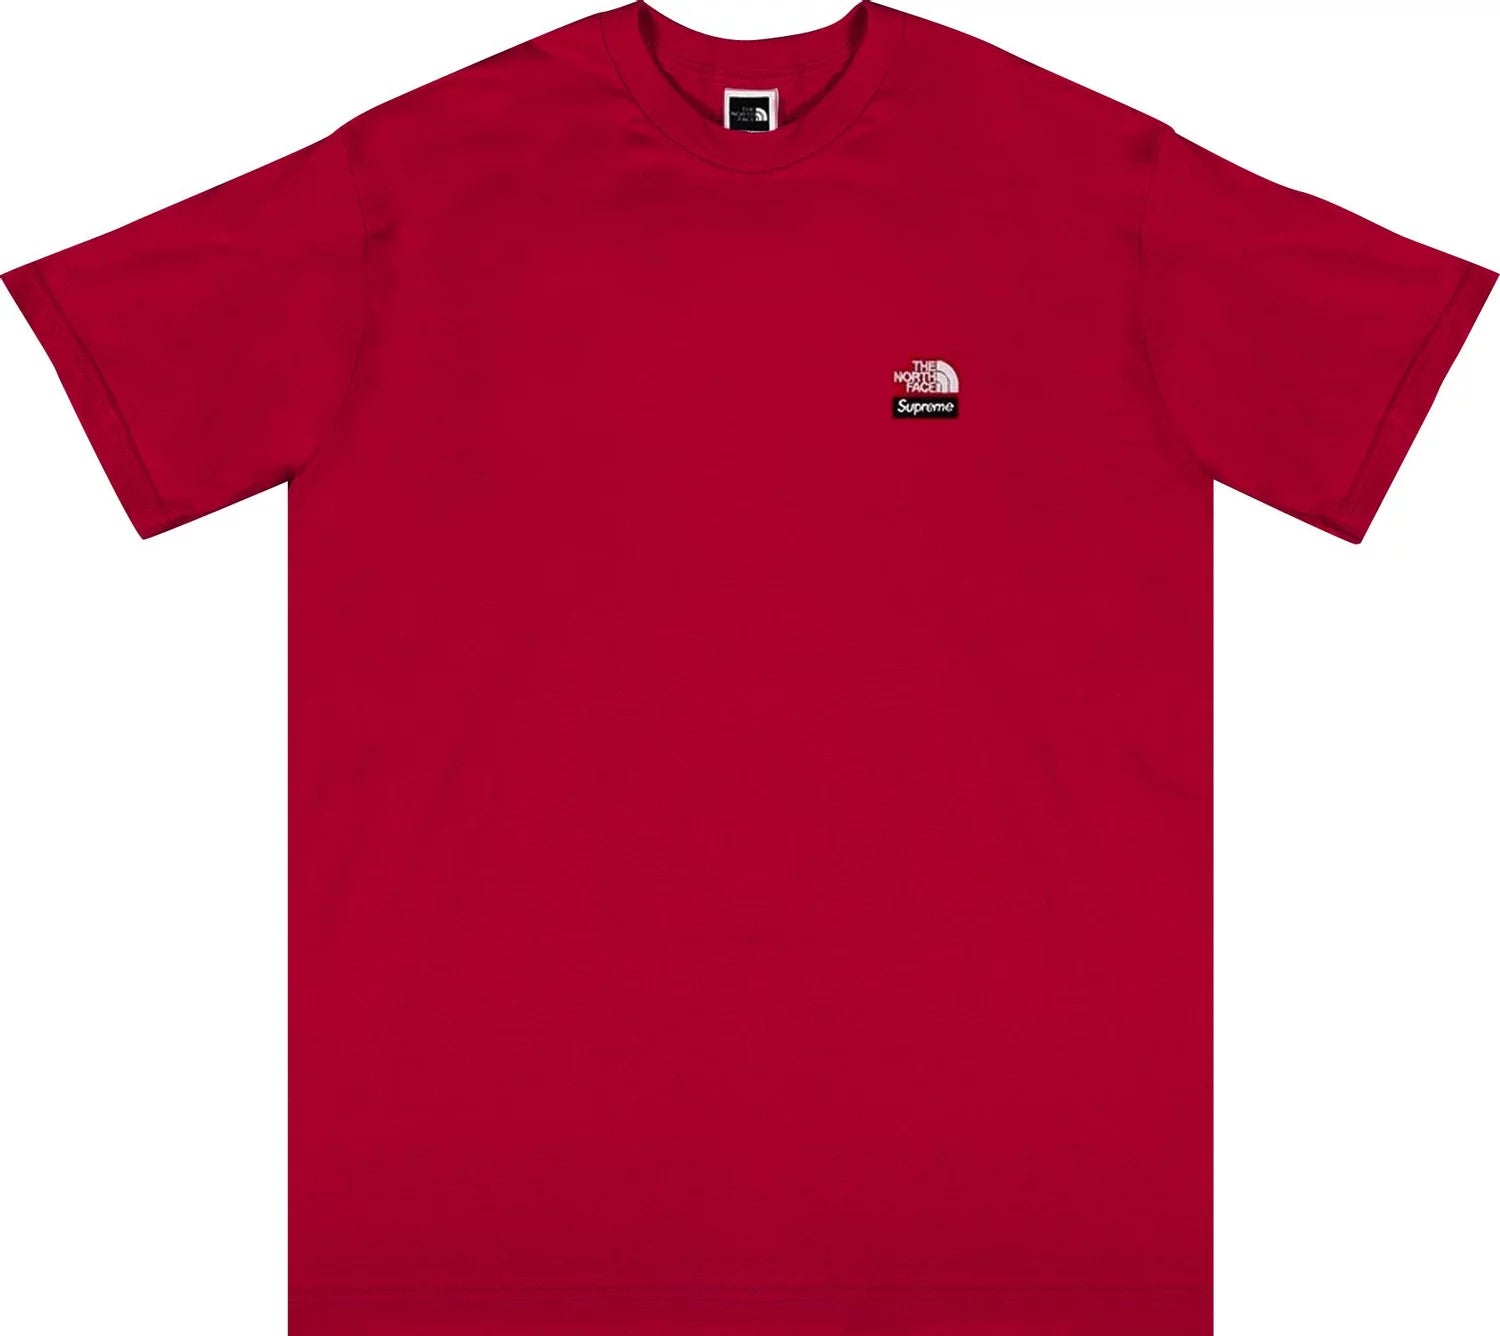 Supreme x The North Face Bandana Tee 'Red'